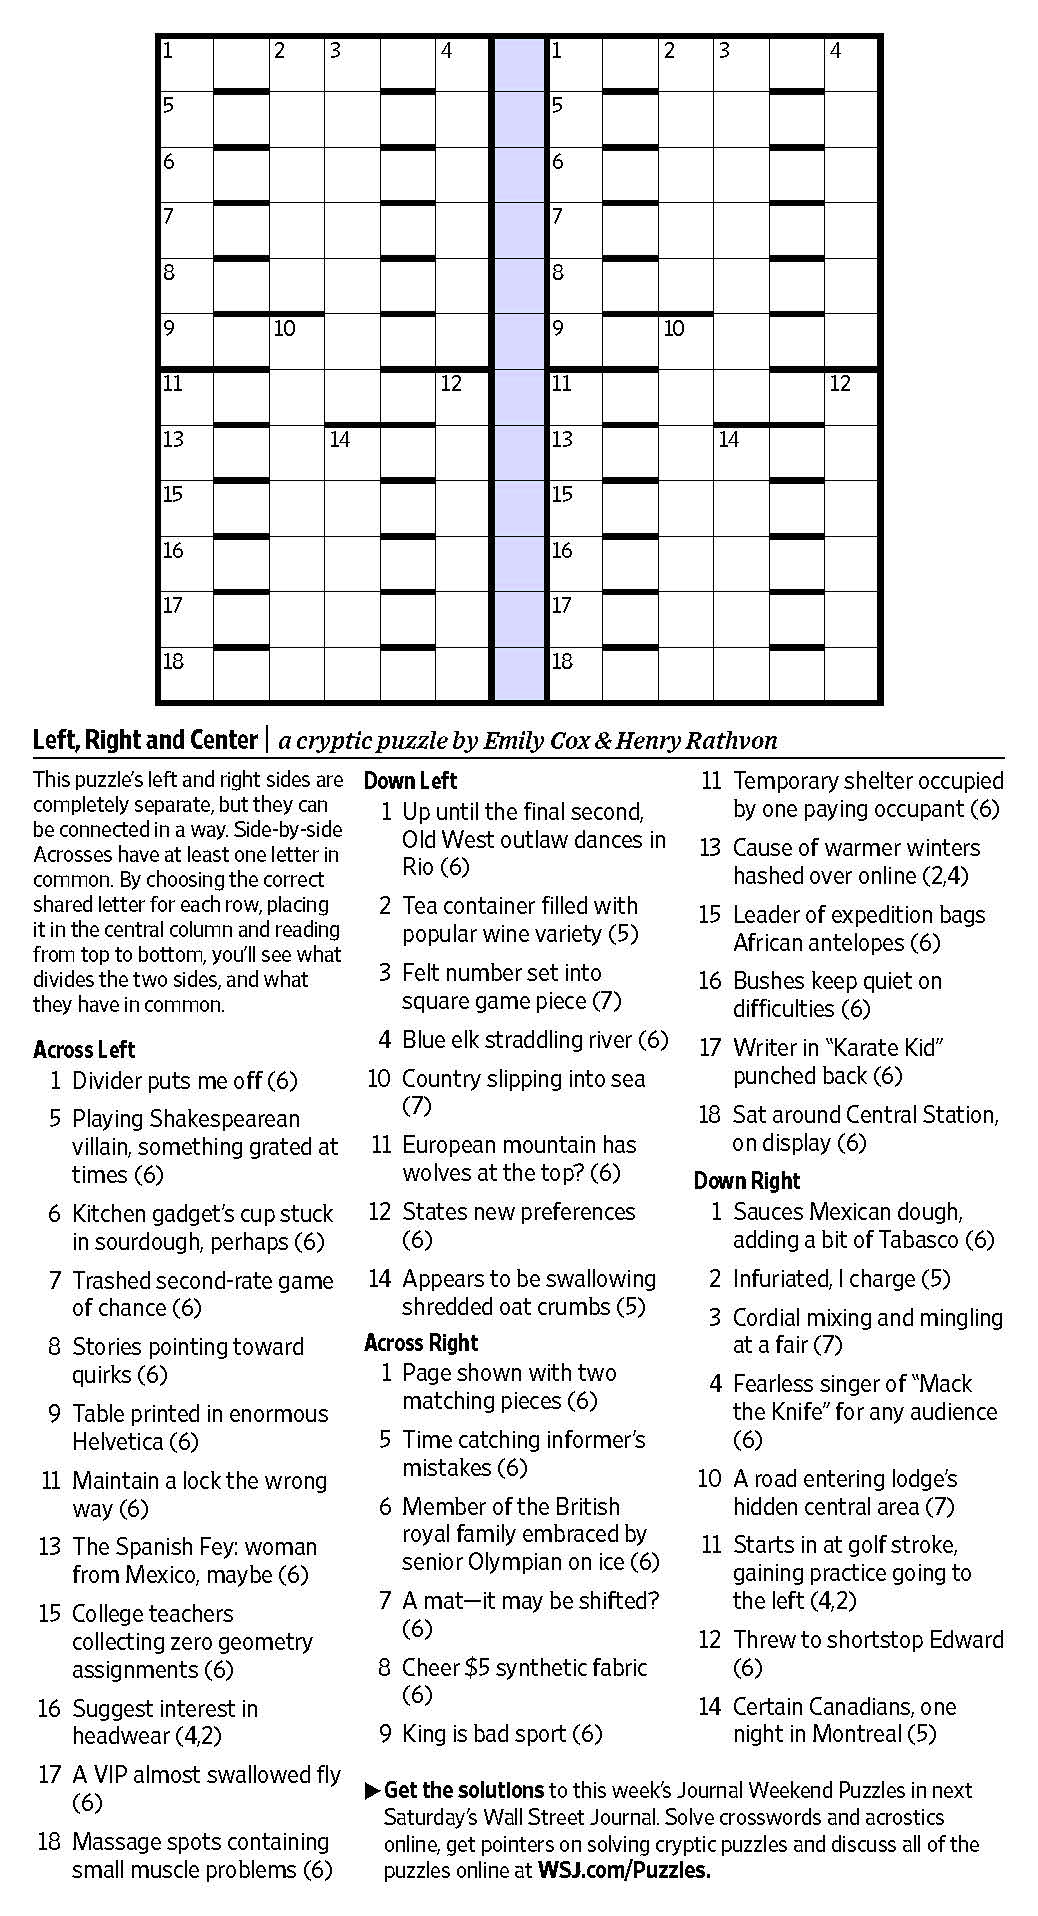 Left, Right and Center (Saturday Puzzle) - WSJ Puzzles - WSJ